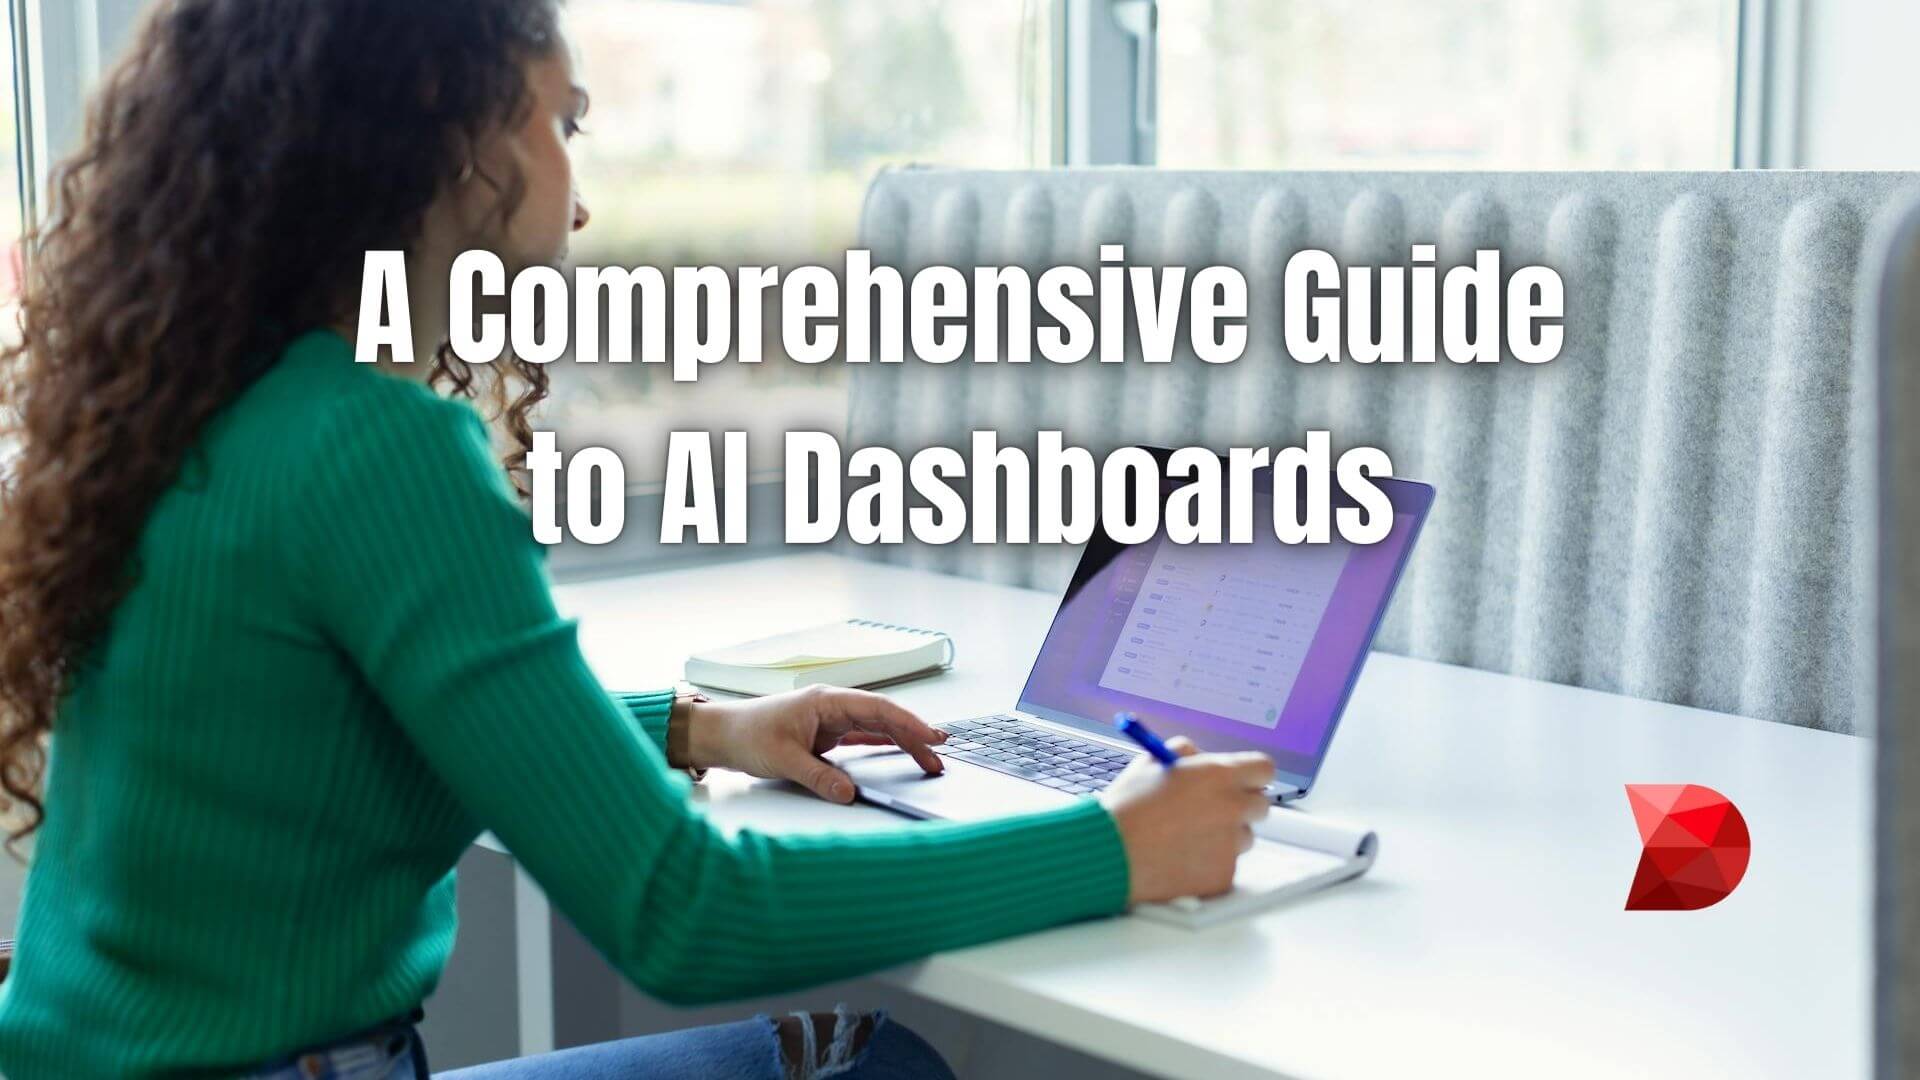 Unlock the potential of AI dashboards with our full guide. Learn key strategies, tools, and best practices for effective data visualization.